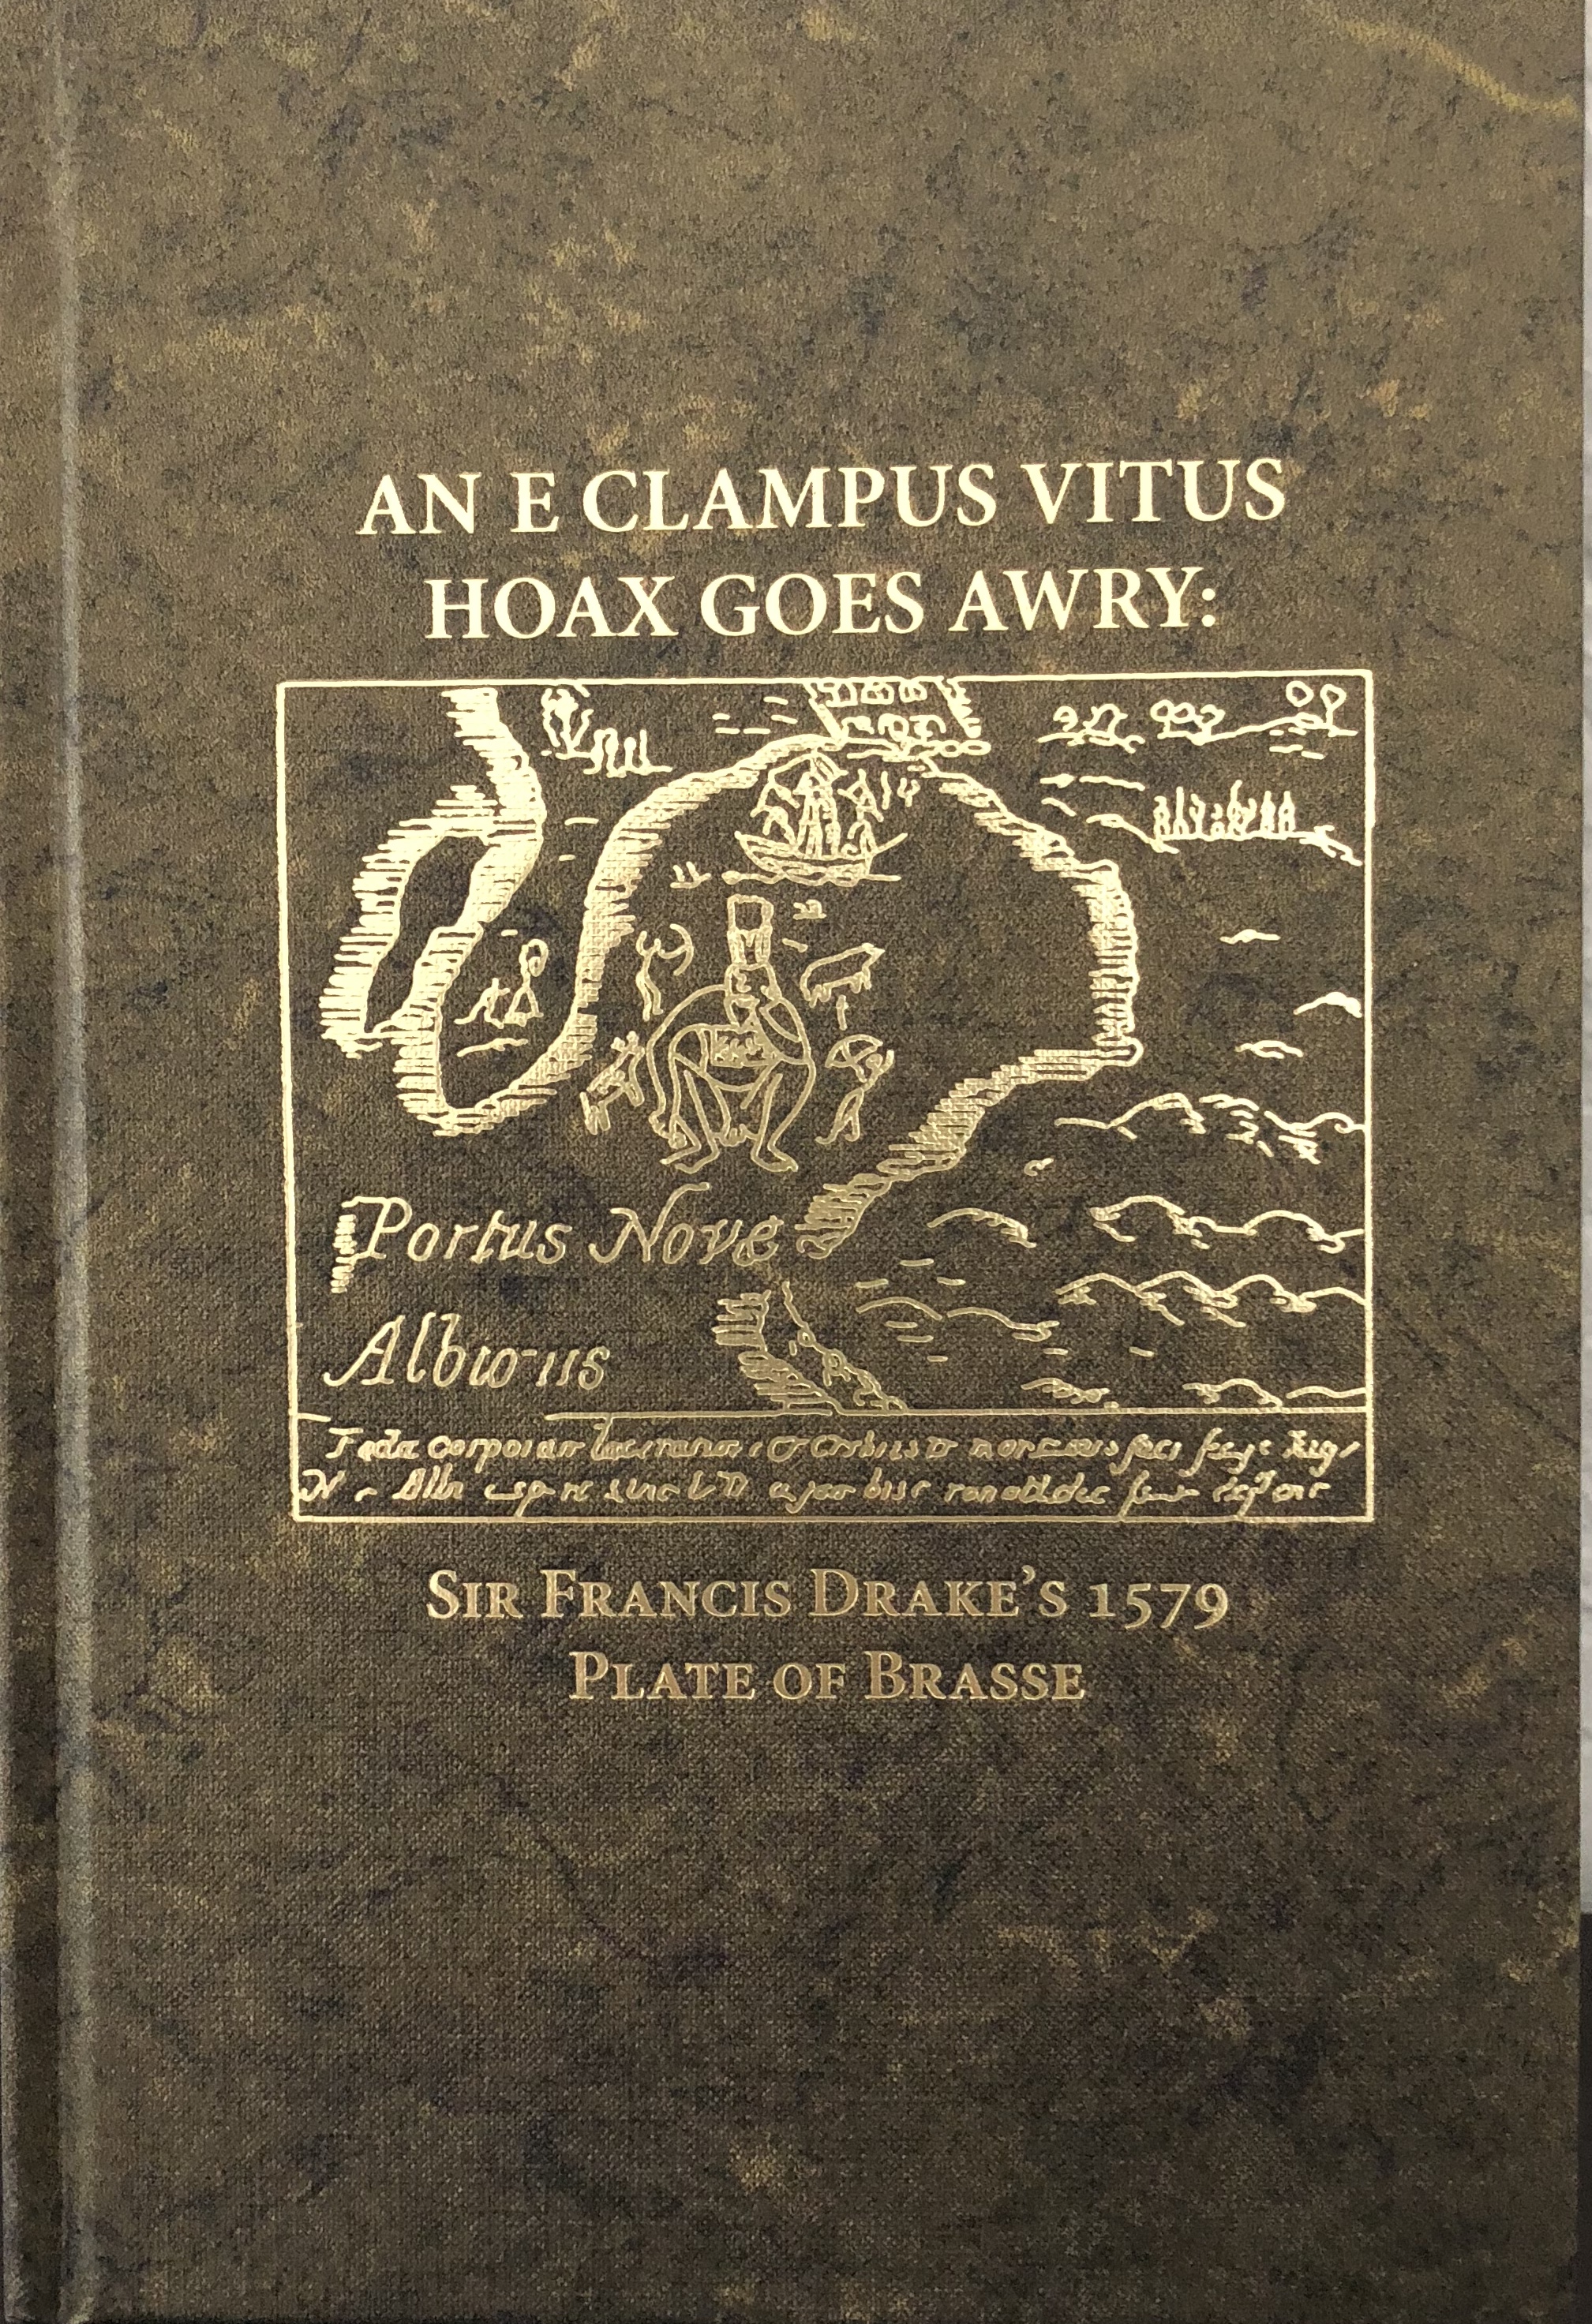 An E Clampus Vitus Hoax Goes Awry: Sir Francis Drake's 1579 Plate of Brasse